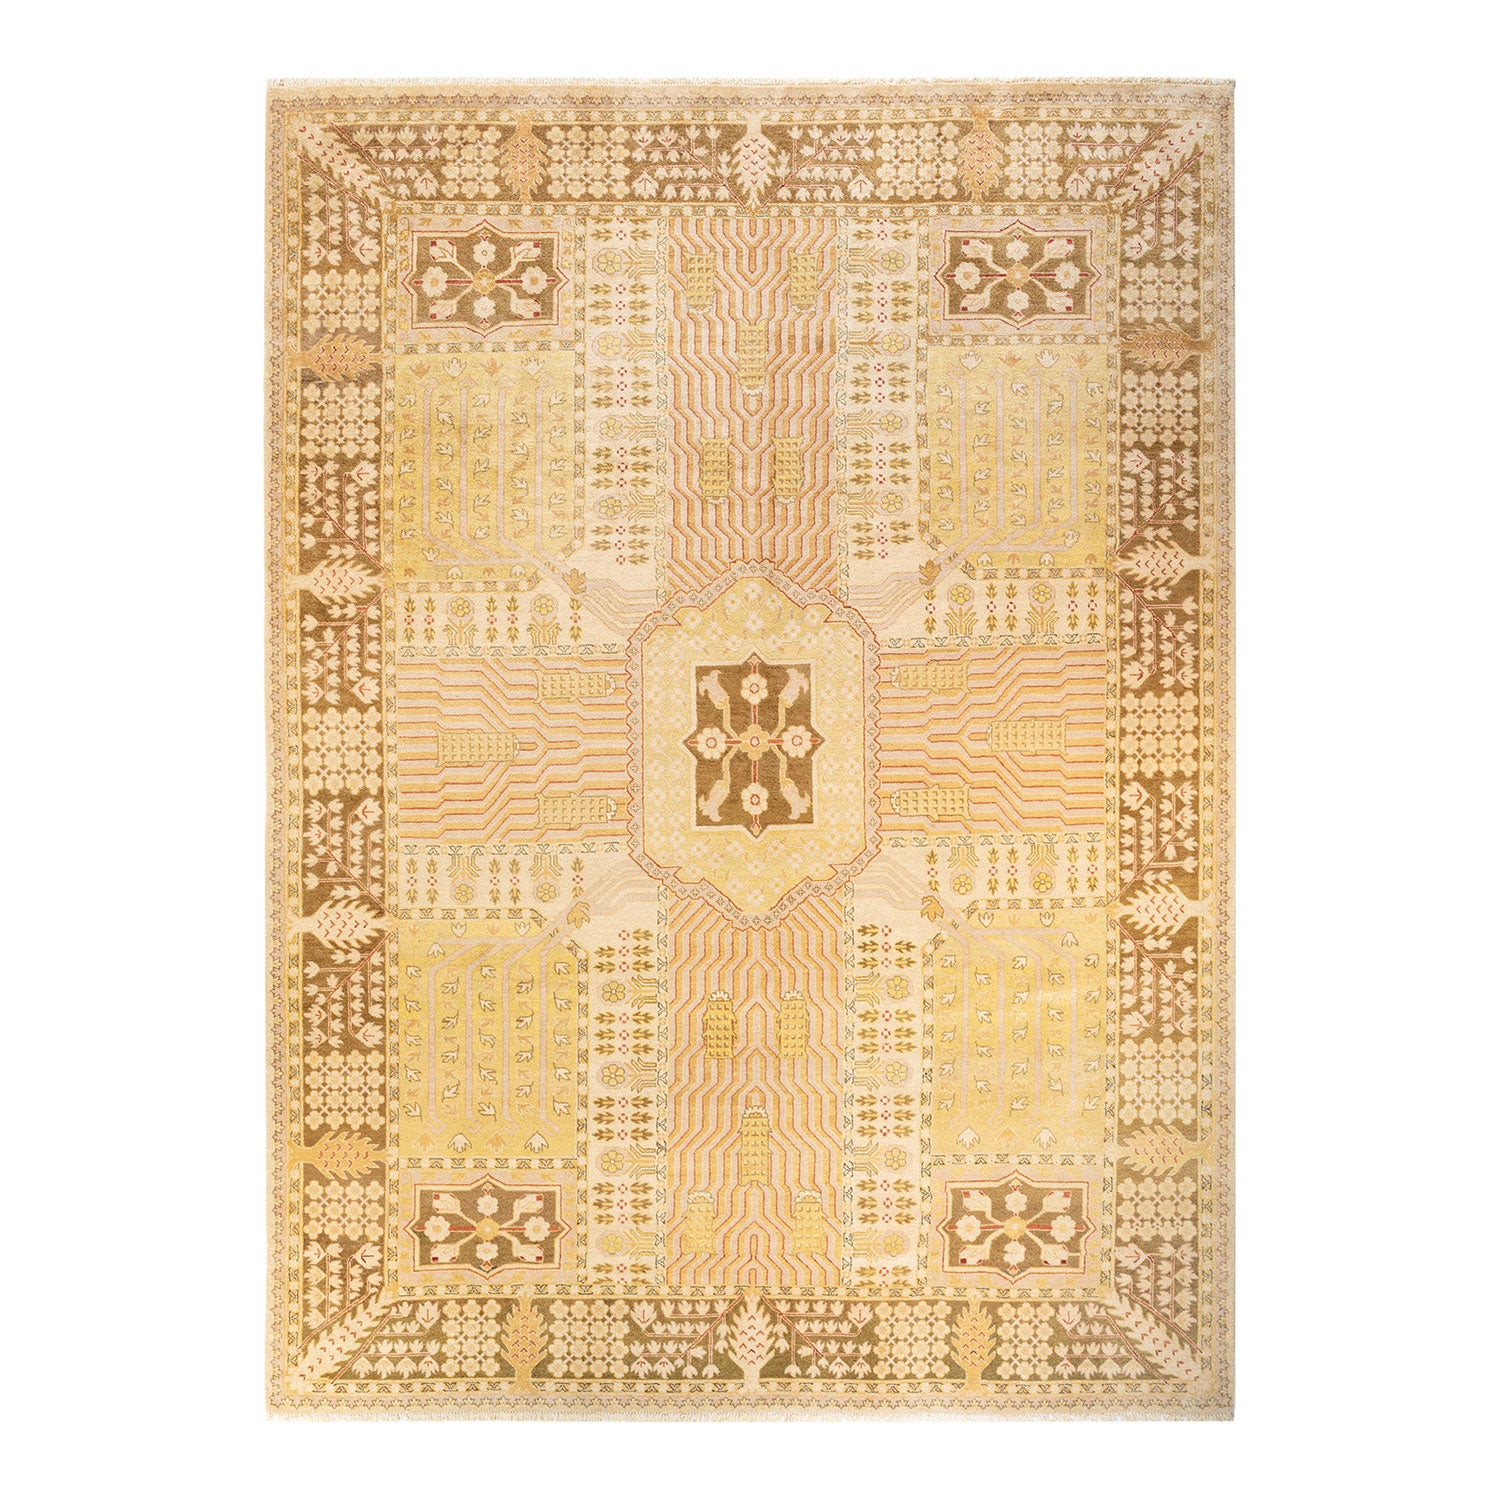 Intricately patterned area rug in subdued palette with geometric motifs.